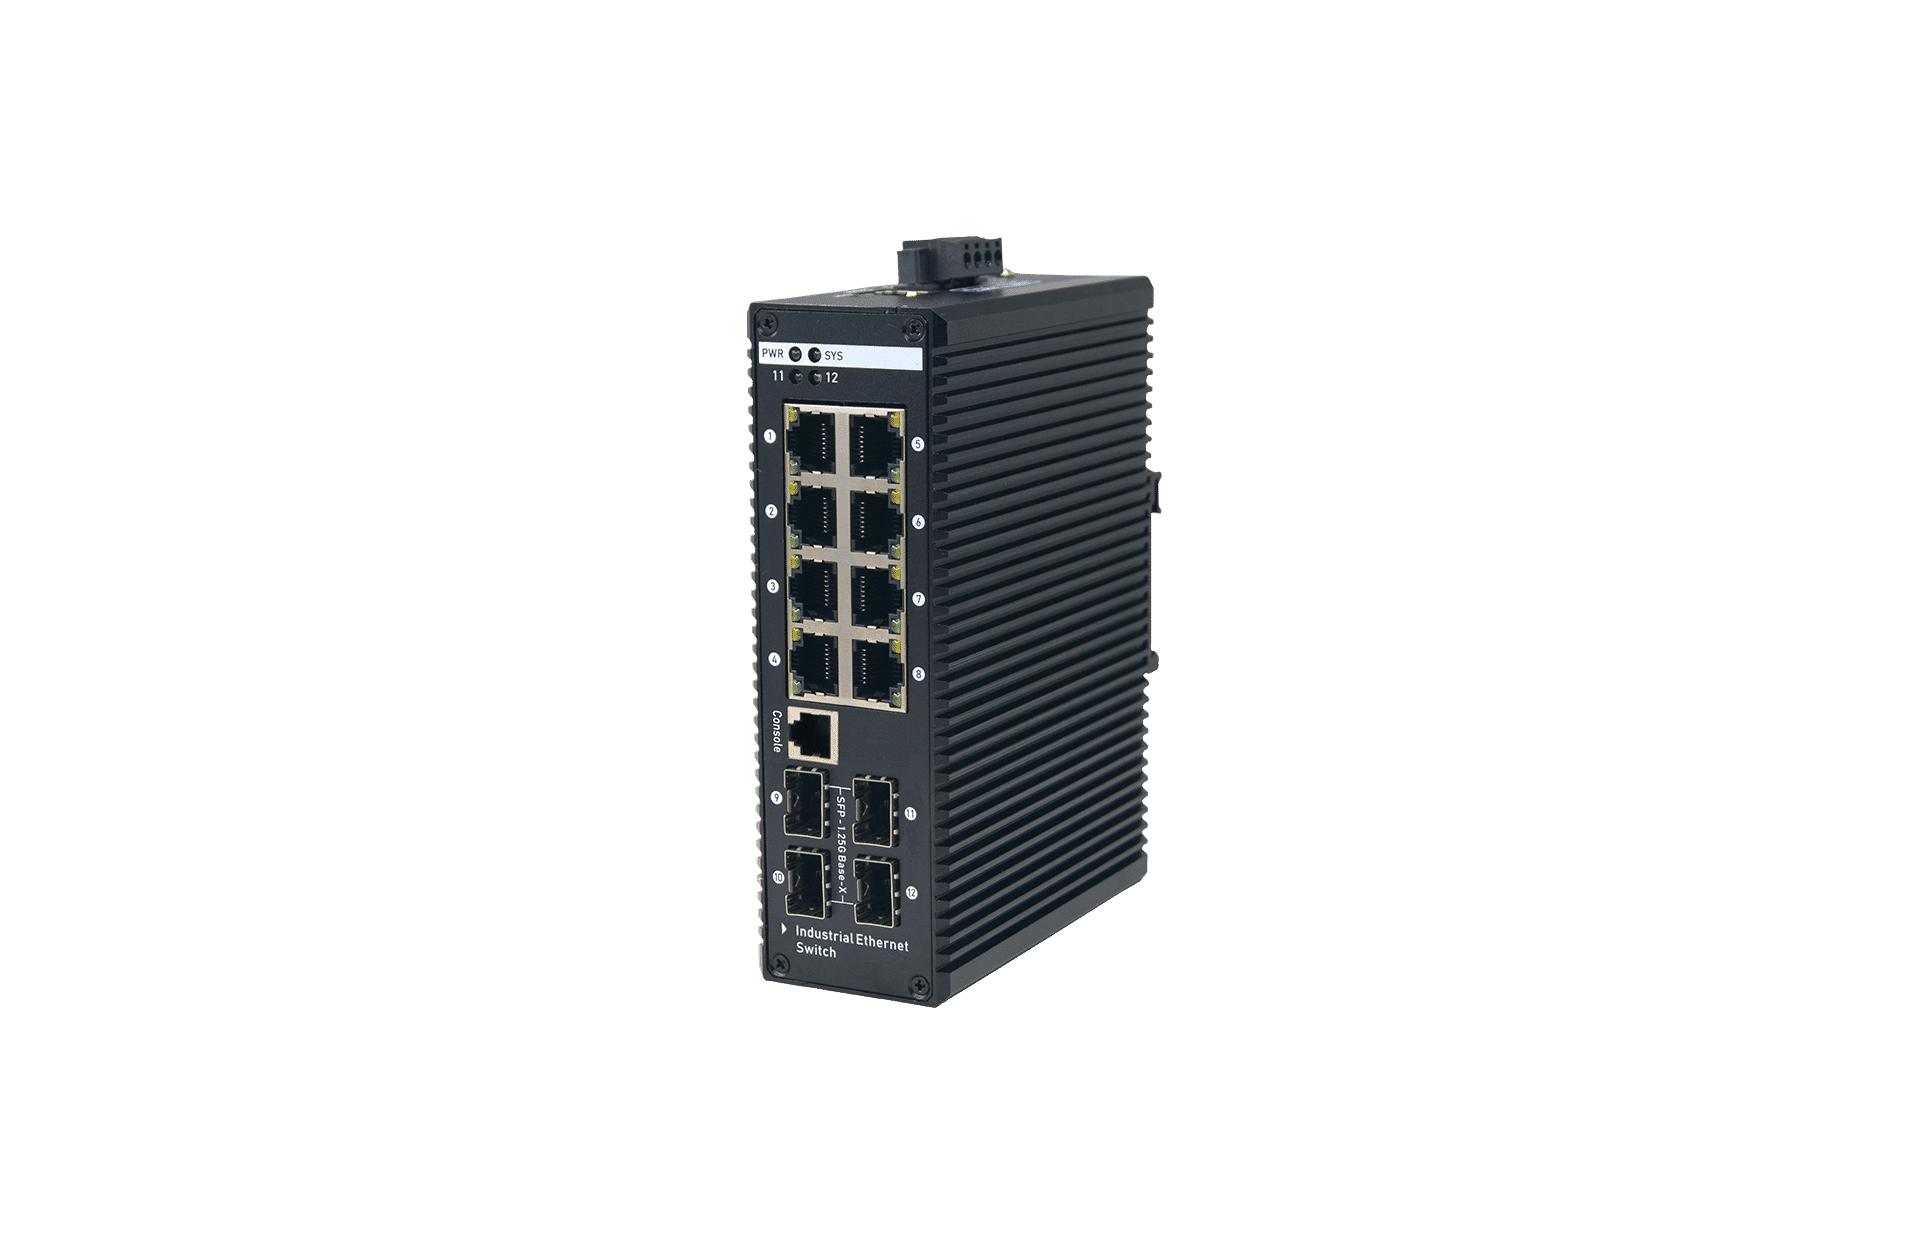 8 Ports 10/100/1000Mbps Managed Industrial Switch with 4 Gigabit SFP